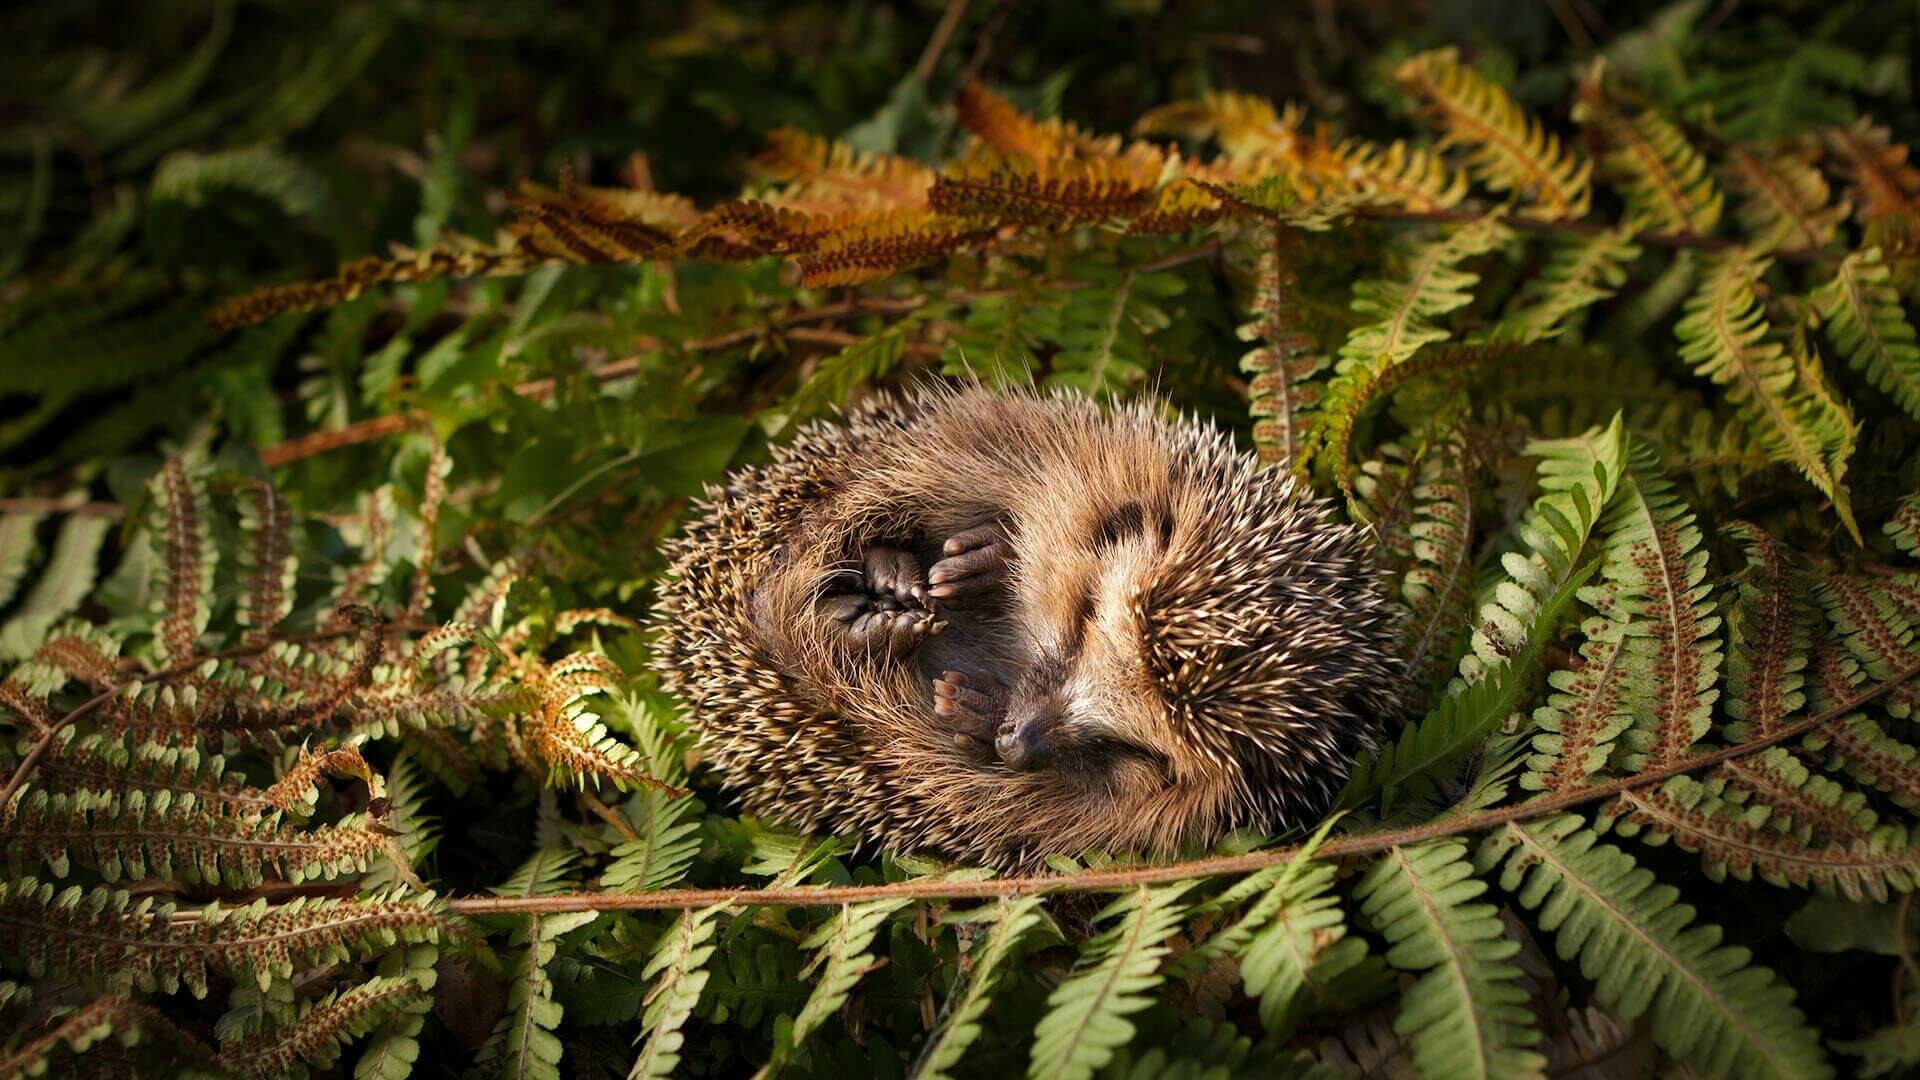 Hedgehog: A small mammal with porcupine-like sharp spines all over its body. 1920x1080 Full HD Wallpaper.